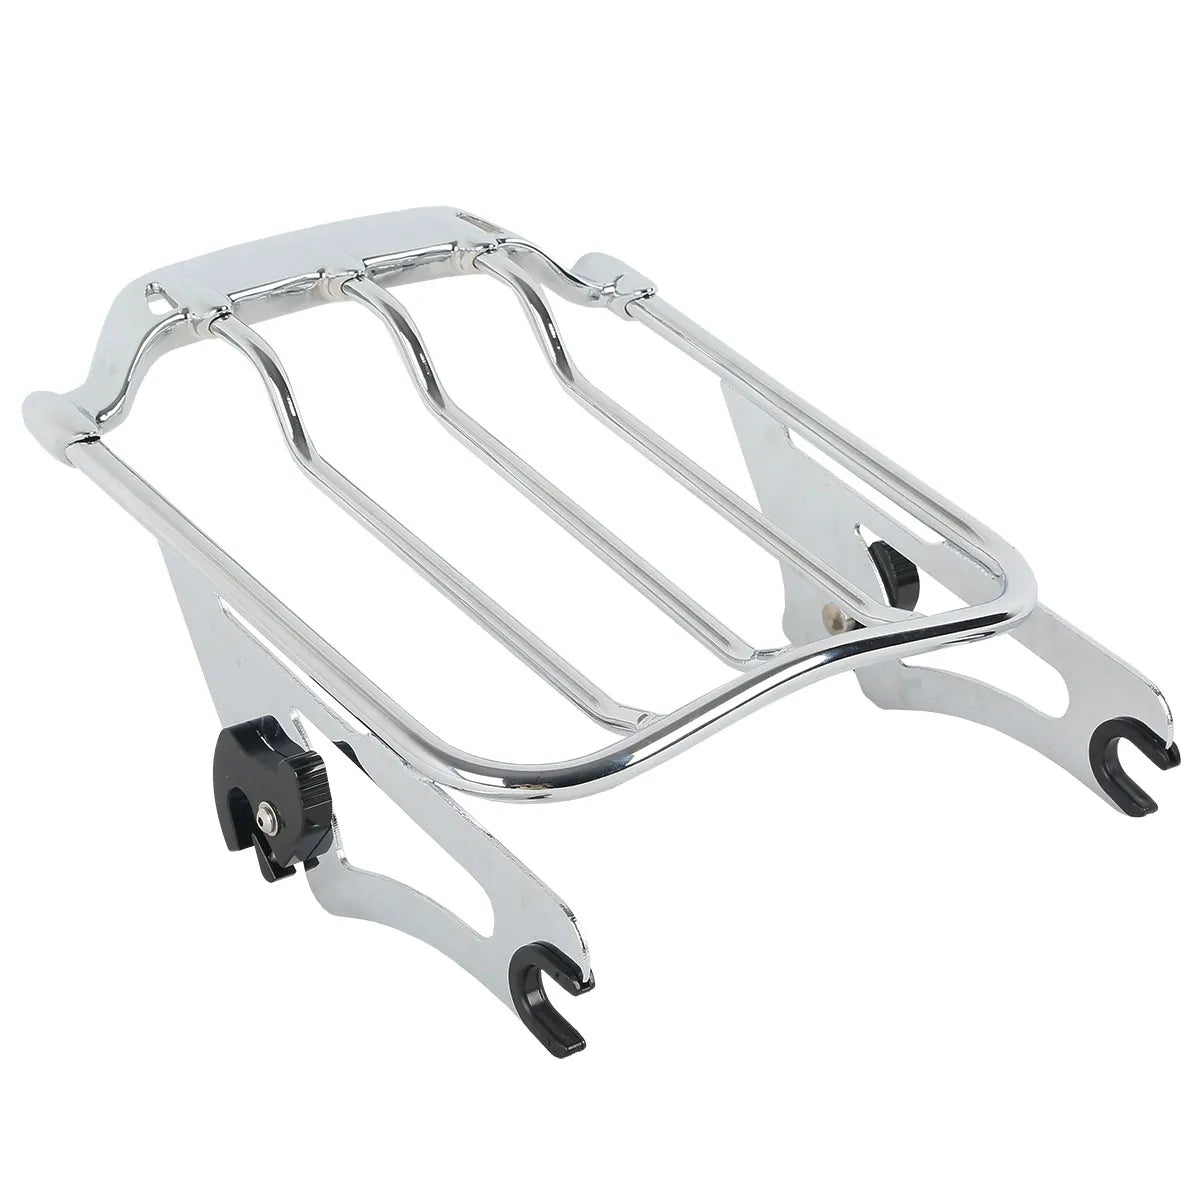 Voodoo Cycle House Tour Pack Luggage Rack With 4 Point Docking Set For Harley-Davidson Touring Electra Street Glide Road King 2009-2013